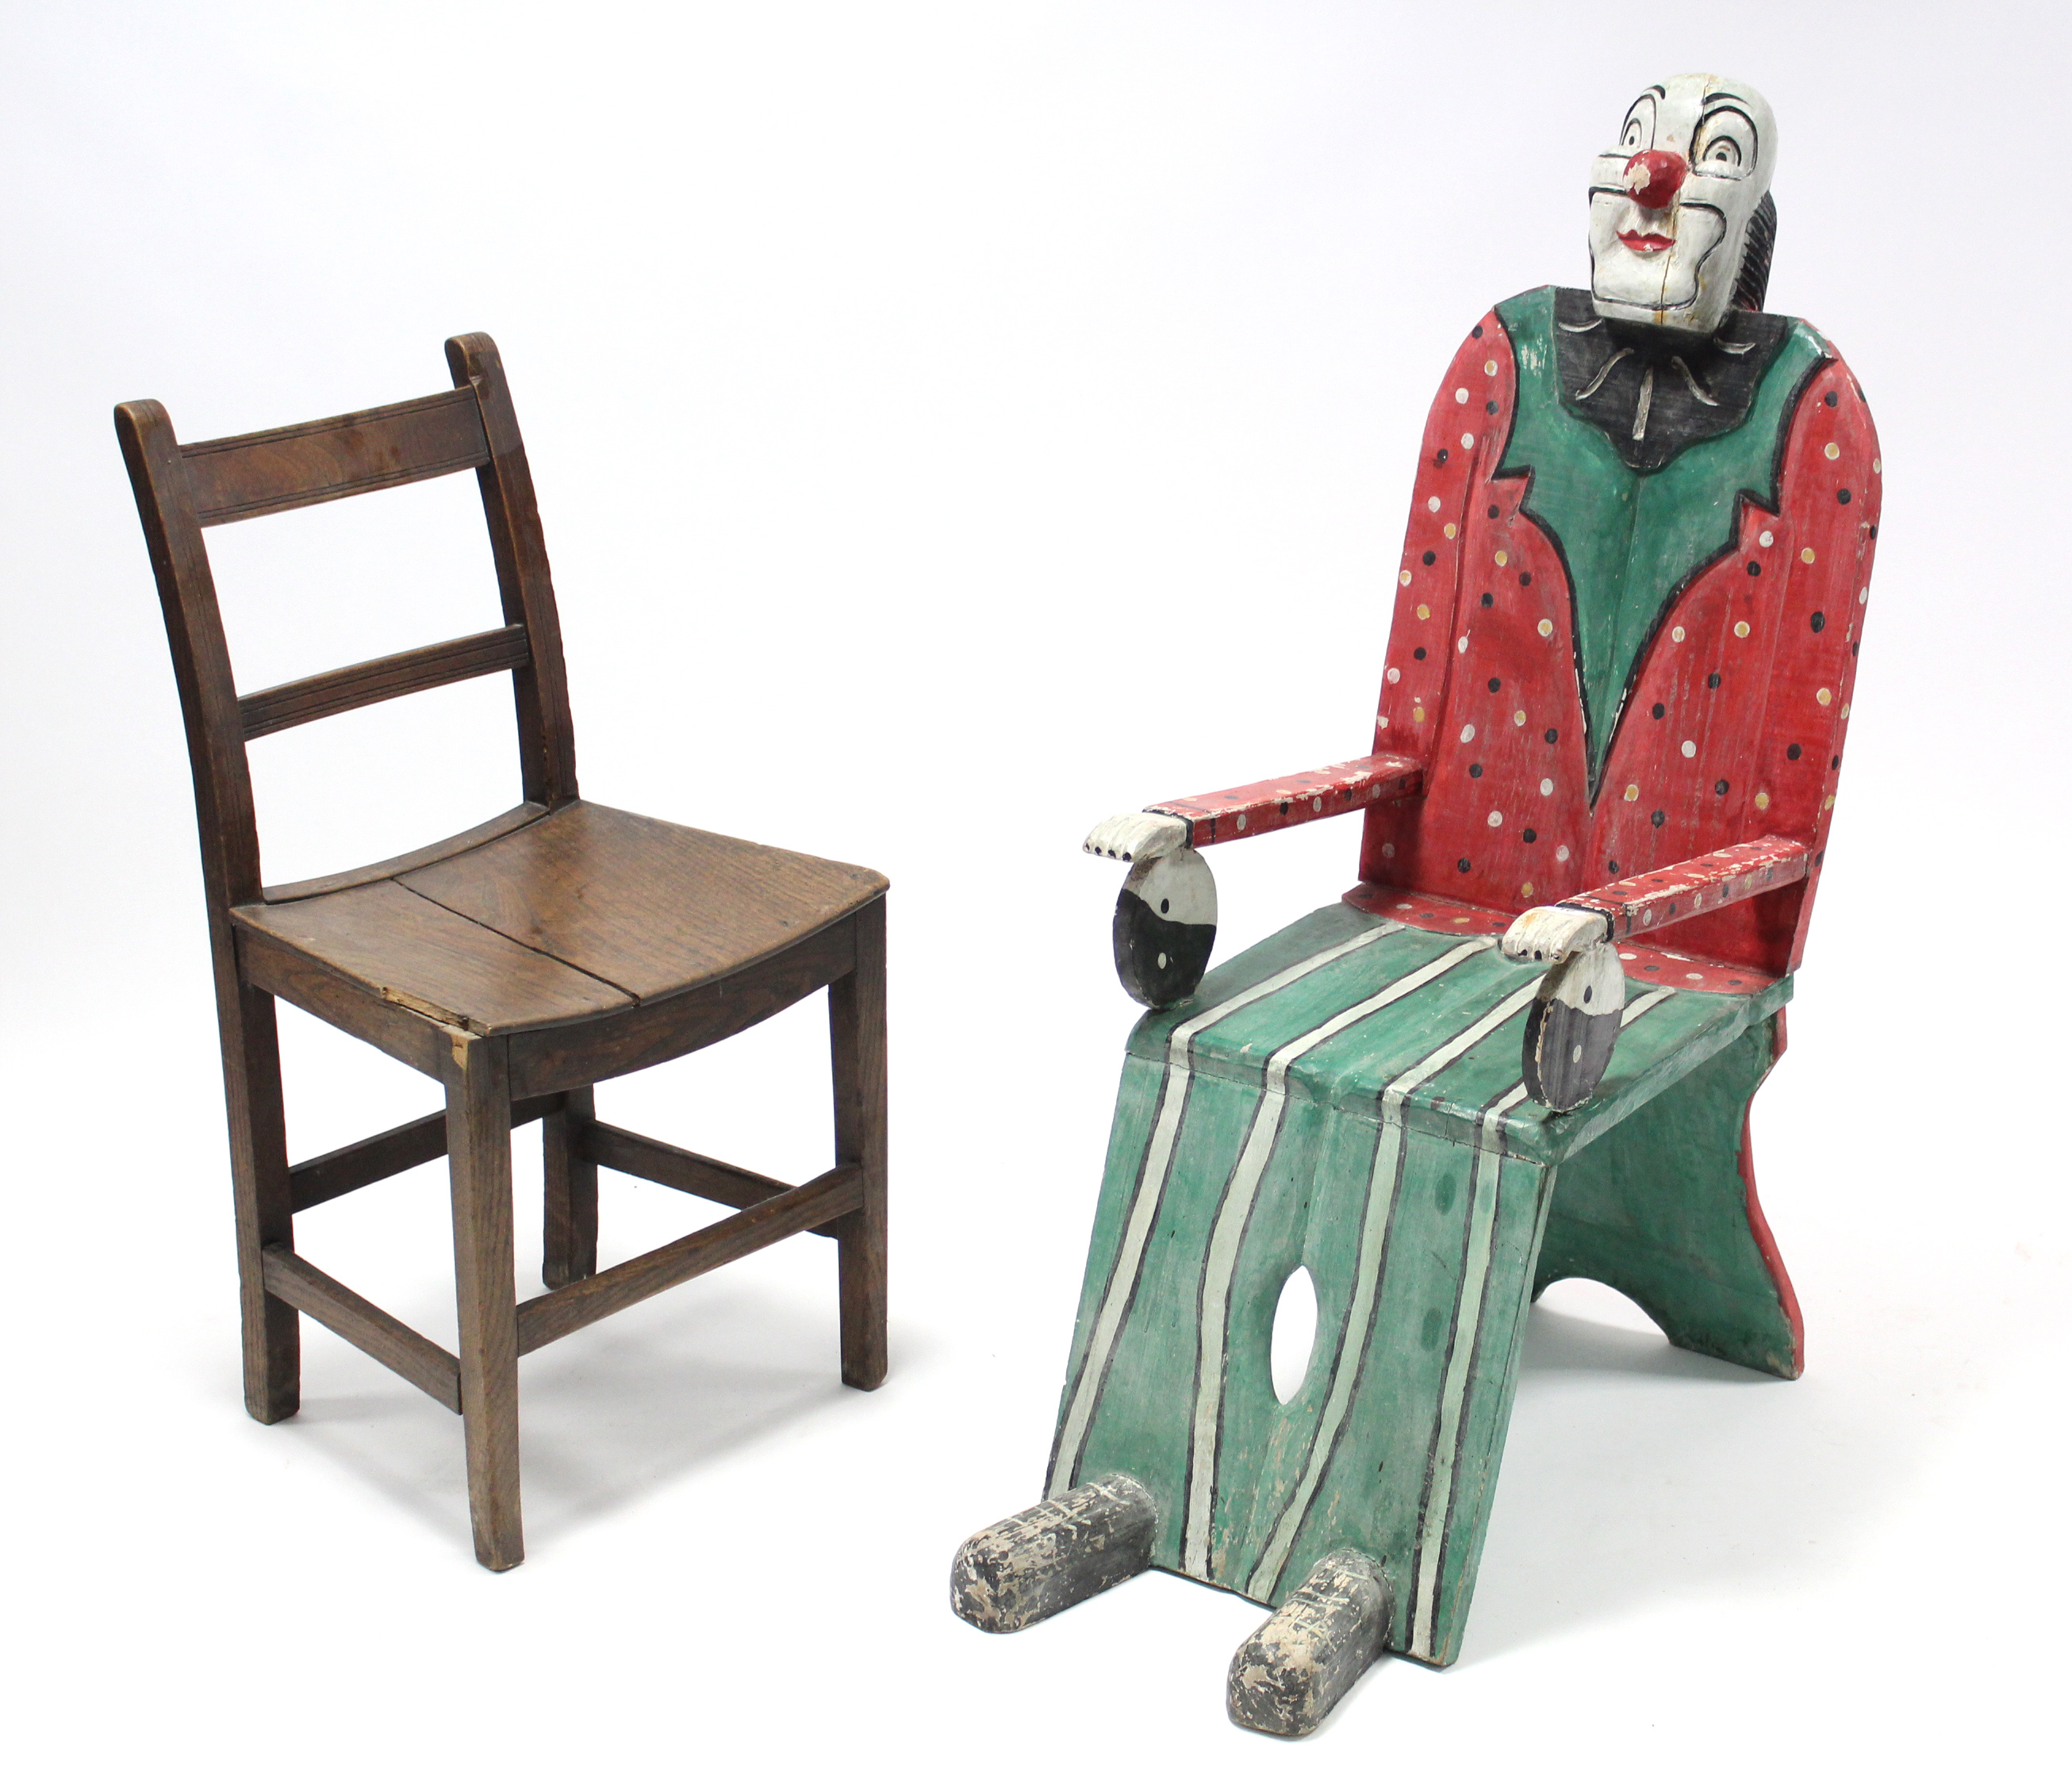 AN EARLY/MID 20th CENTURY PAINTED WOODEN NOVELTY CIRCUS/FAIRGROUND “CLOWN” CHAIR, 42½” HIGH. - Image 2 of 7